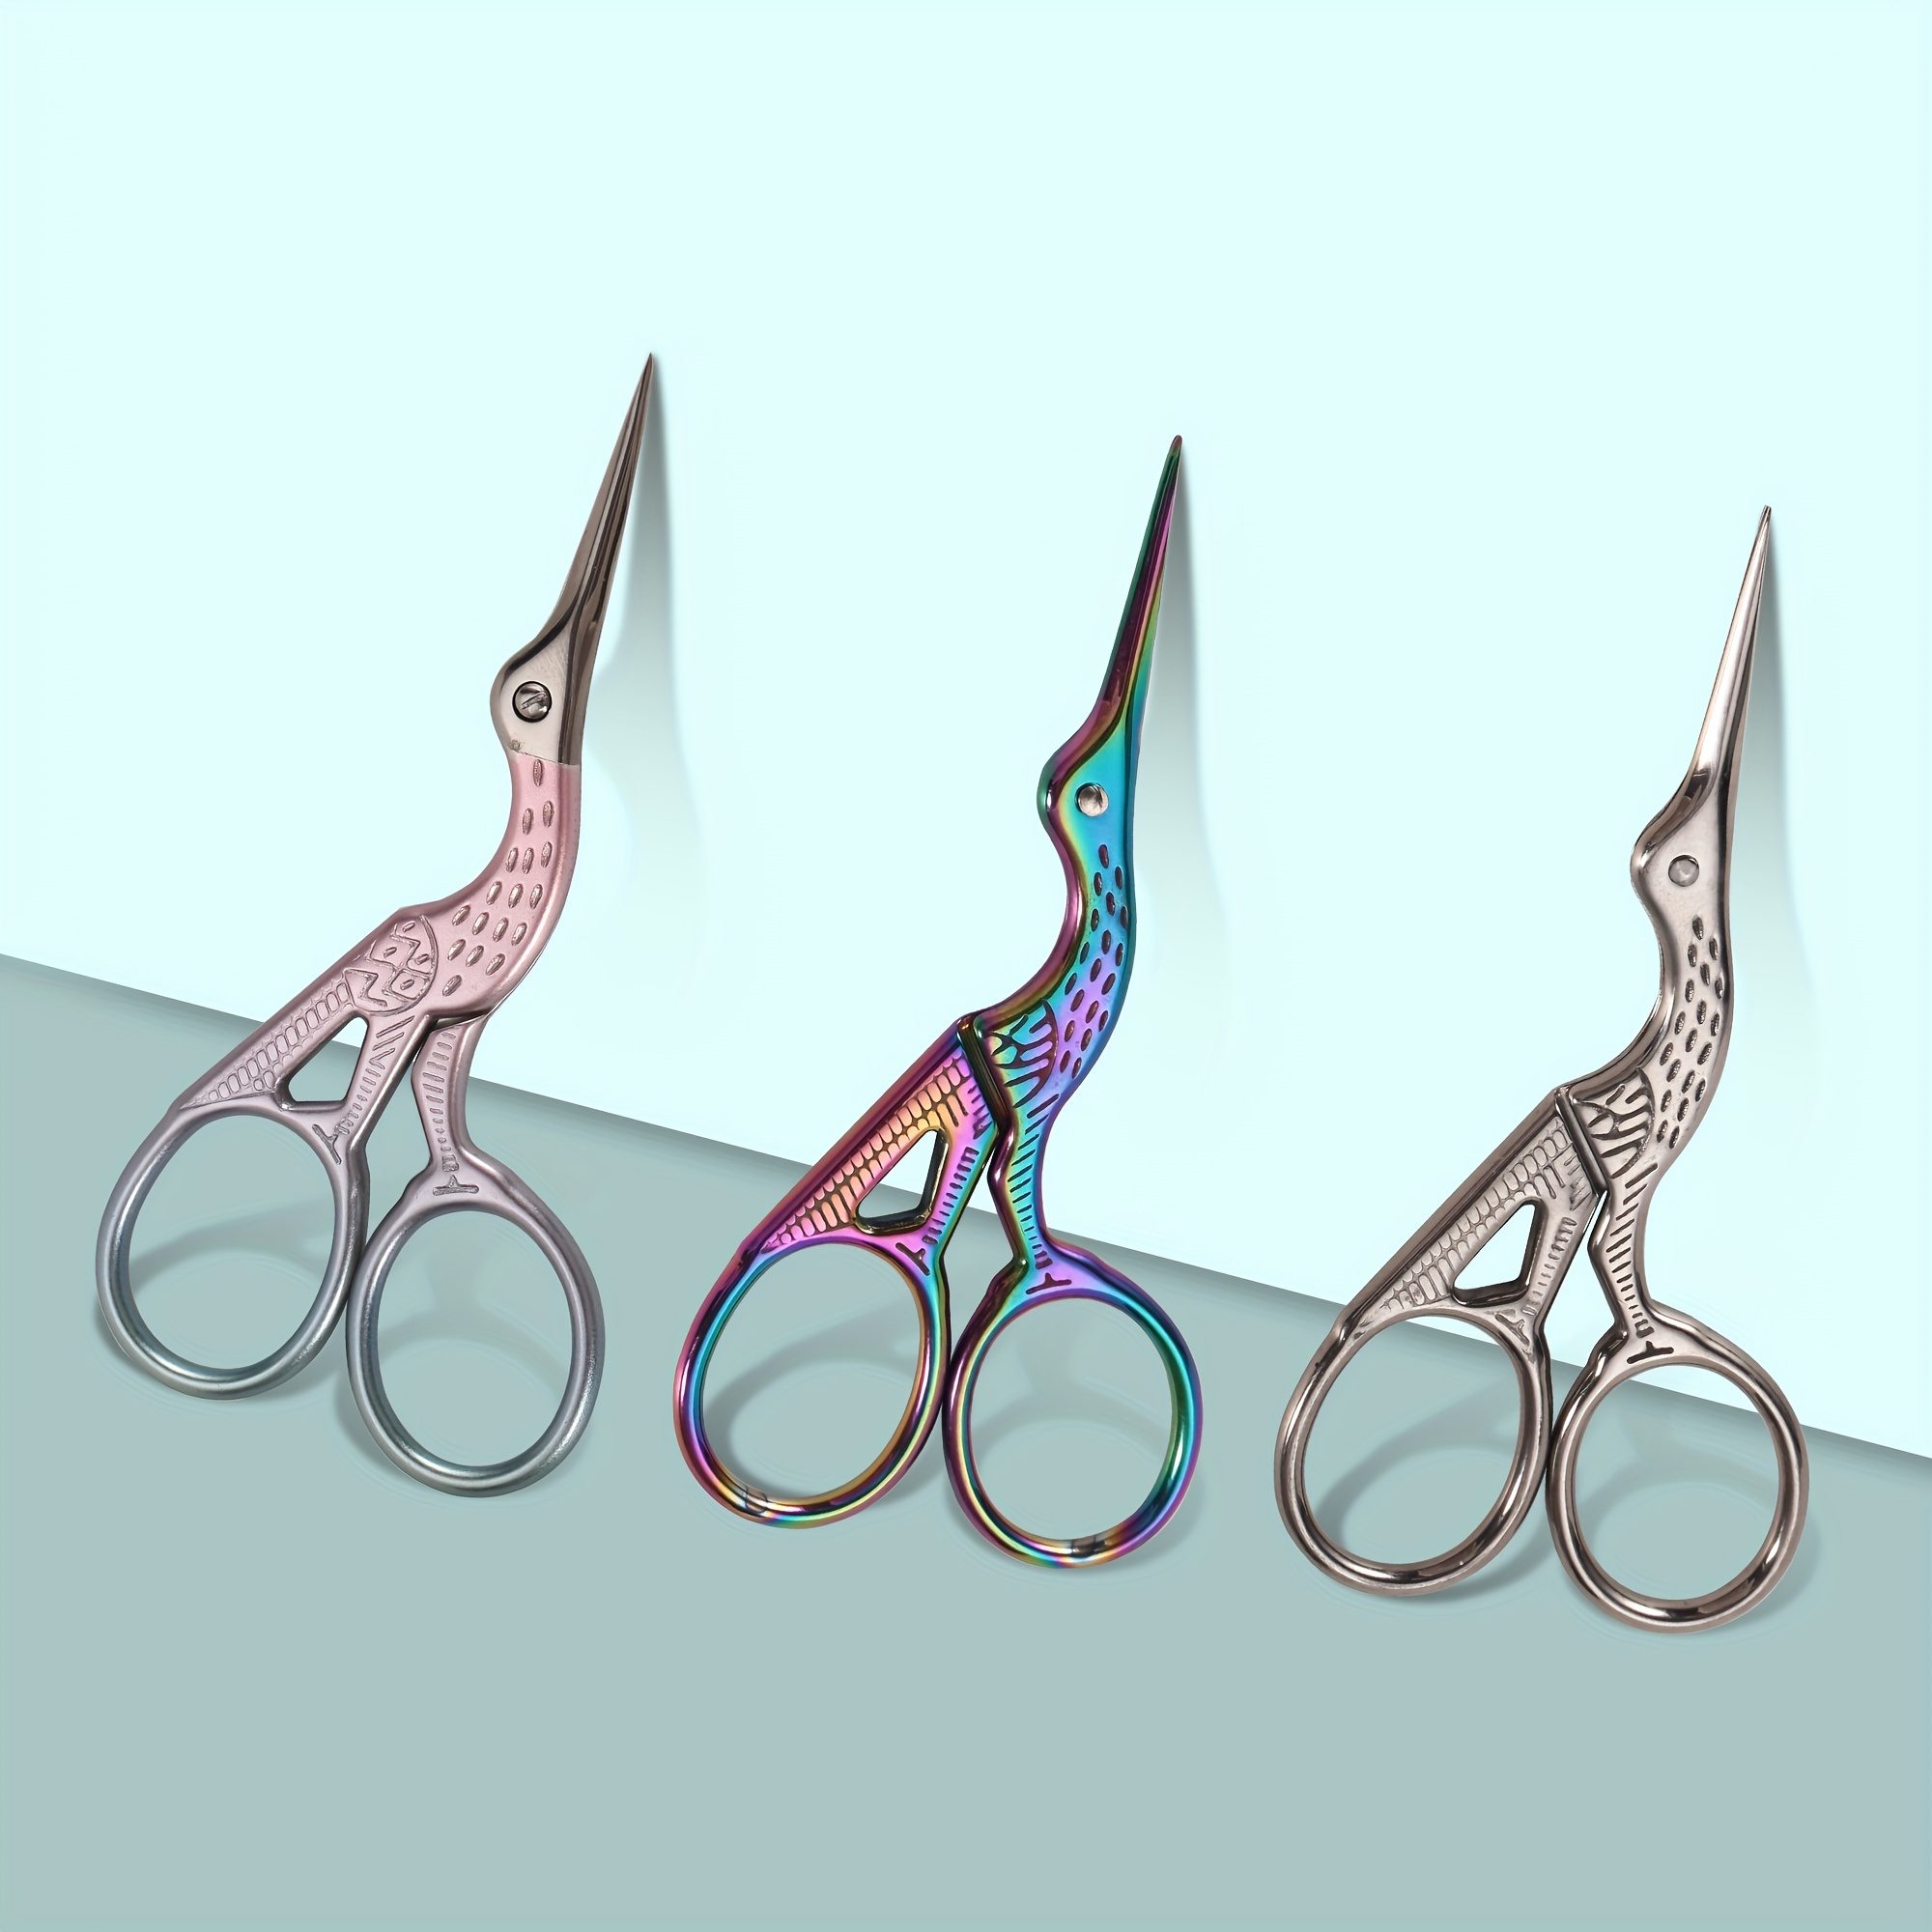 

Crane Design Eyebrow Trimming Scissors, Stainless Steel Beauty Scissors Suitable For Eyebrow, Nose Hair, Beard, All Kinds Of Hair Trimming, Unisex Makeup Care Scissors